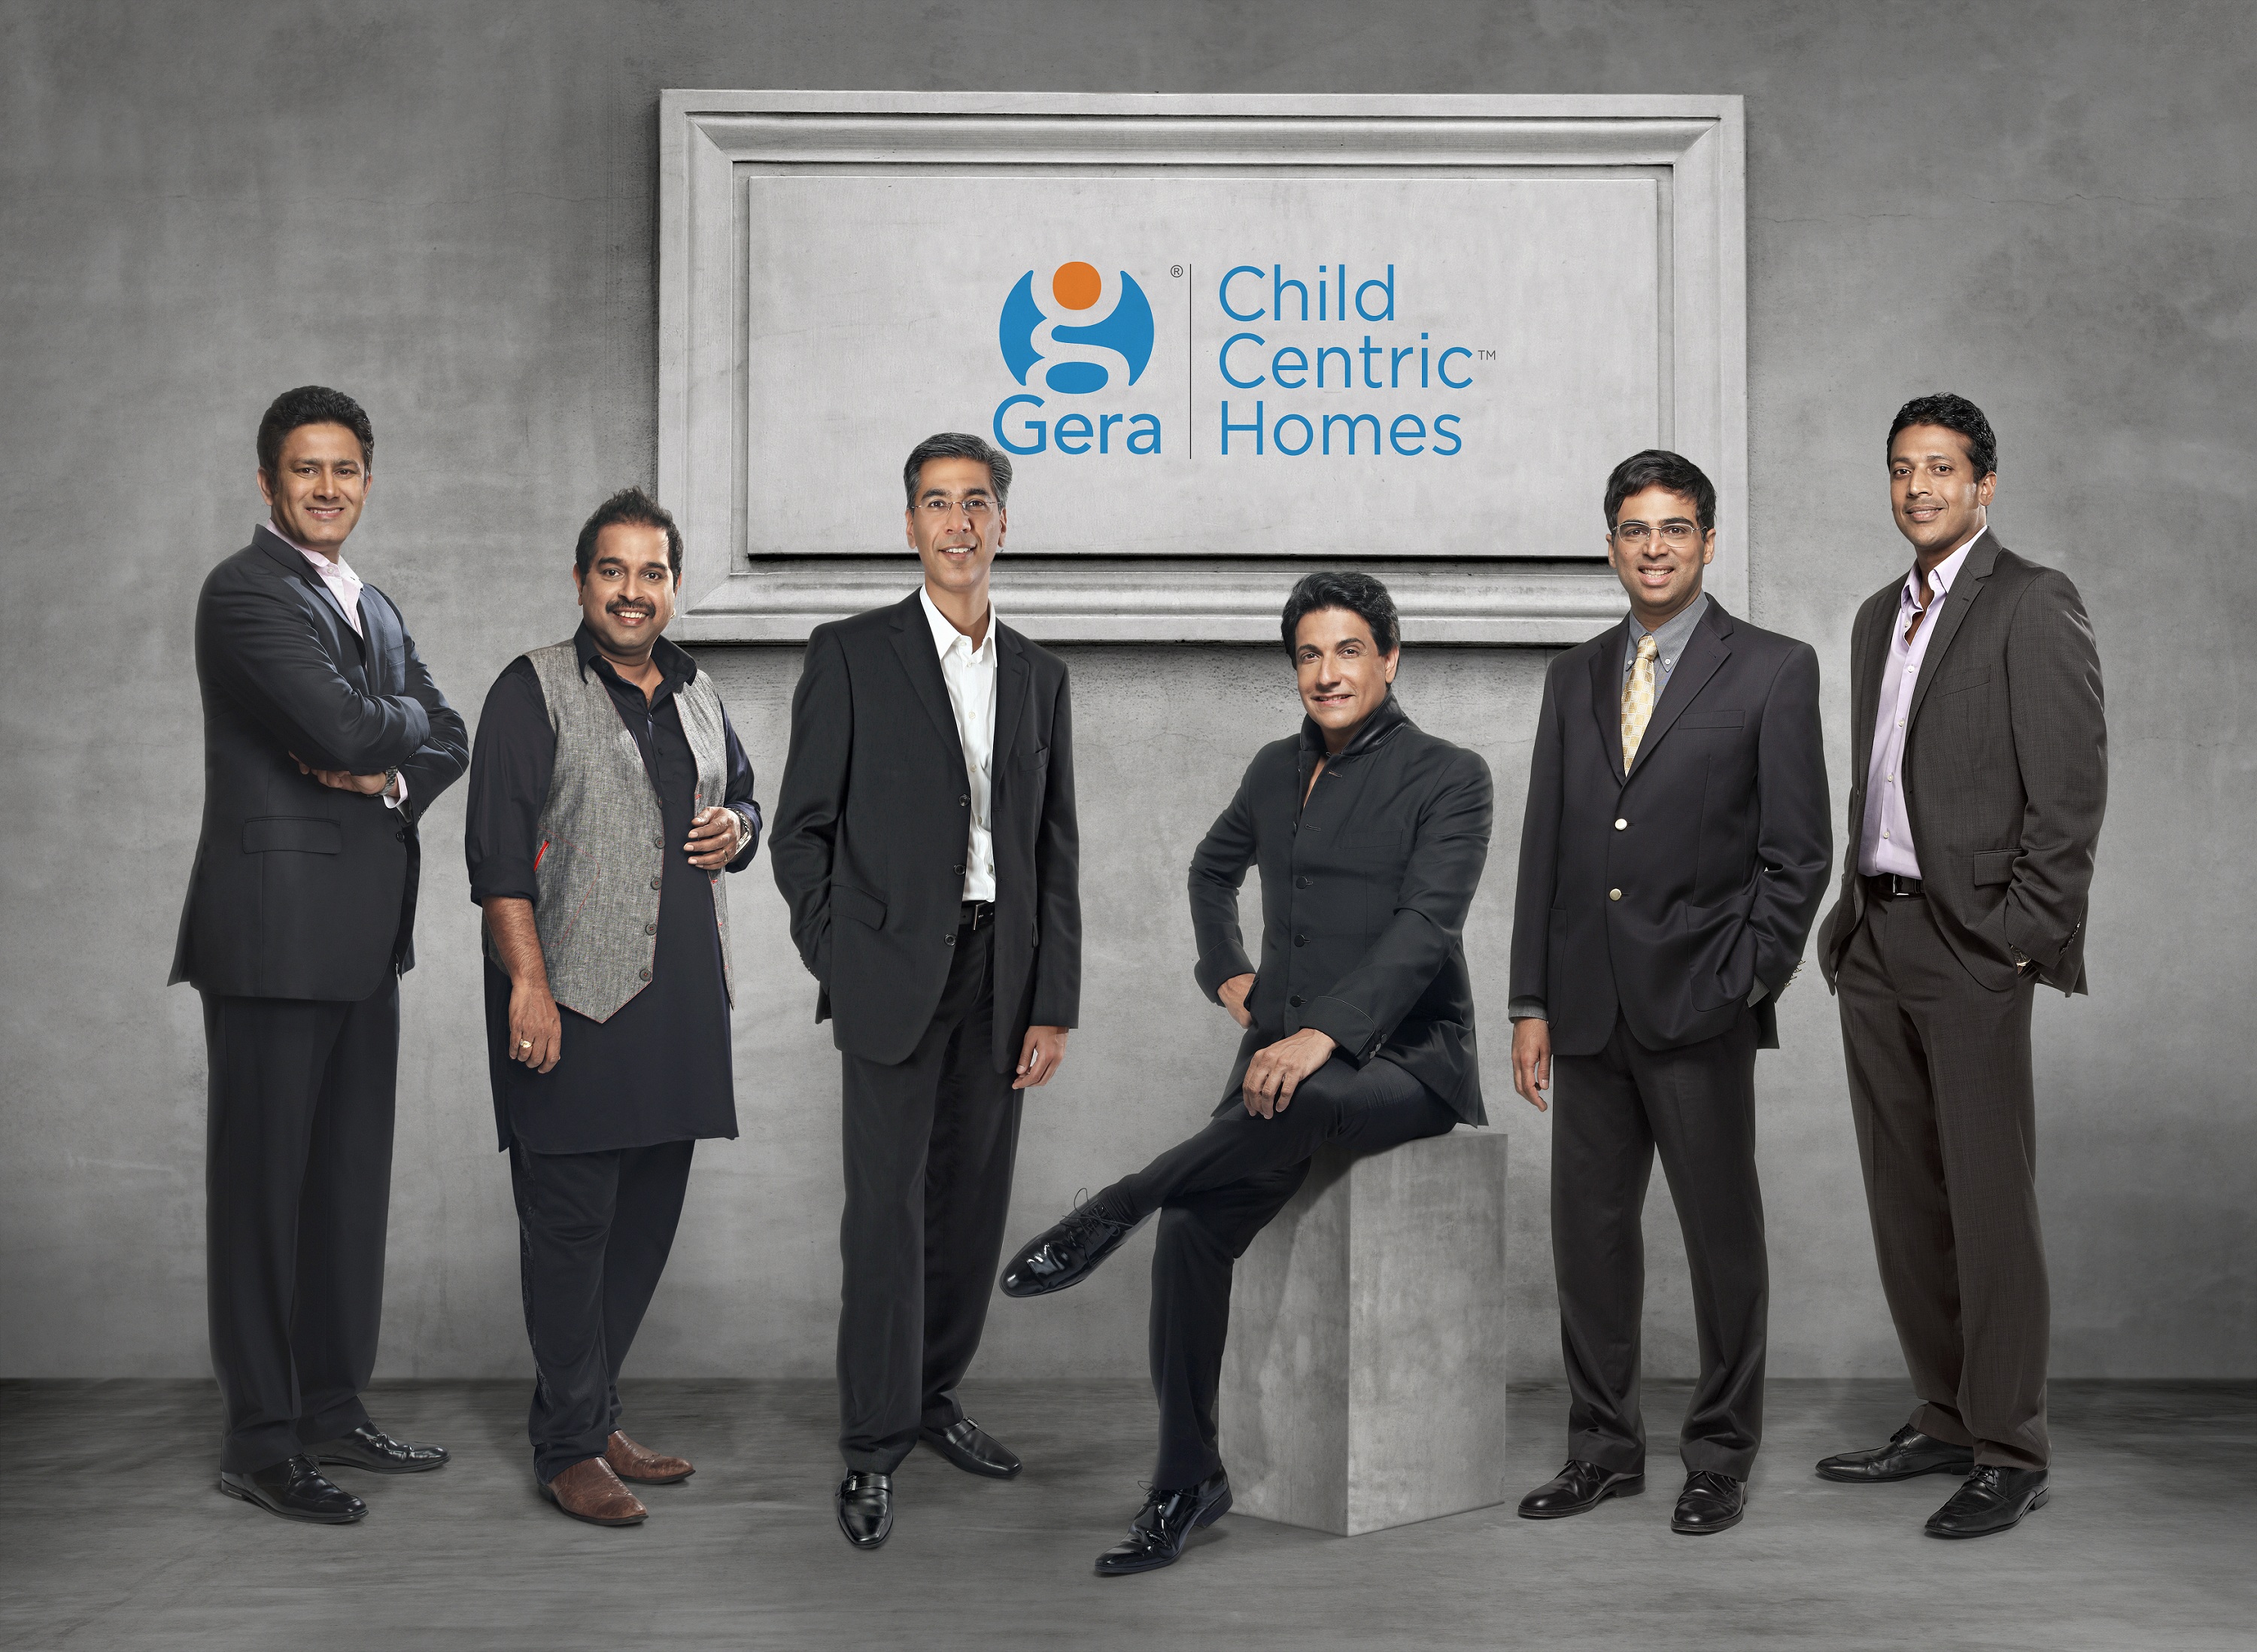 Rohit Gera ChildCentric Homes Launch, India real estate news, Indian realty news, Property news, Track2Media, Track2Realty, Pune